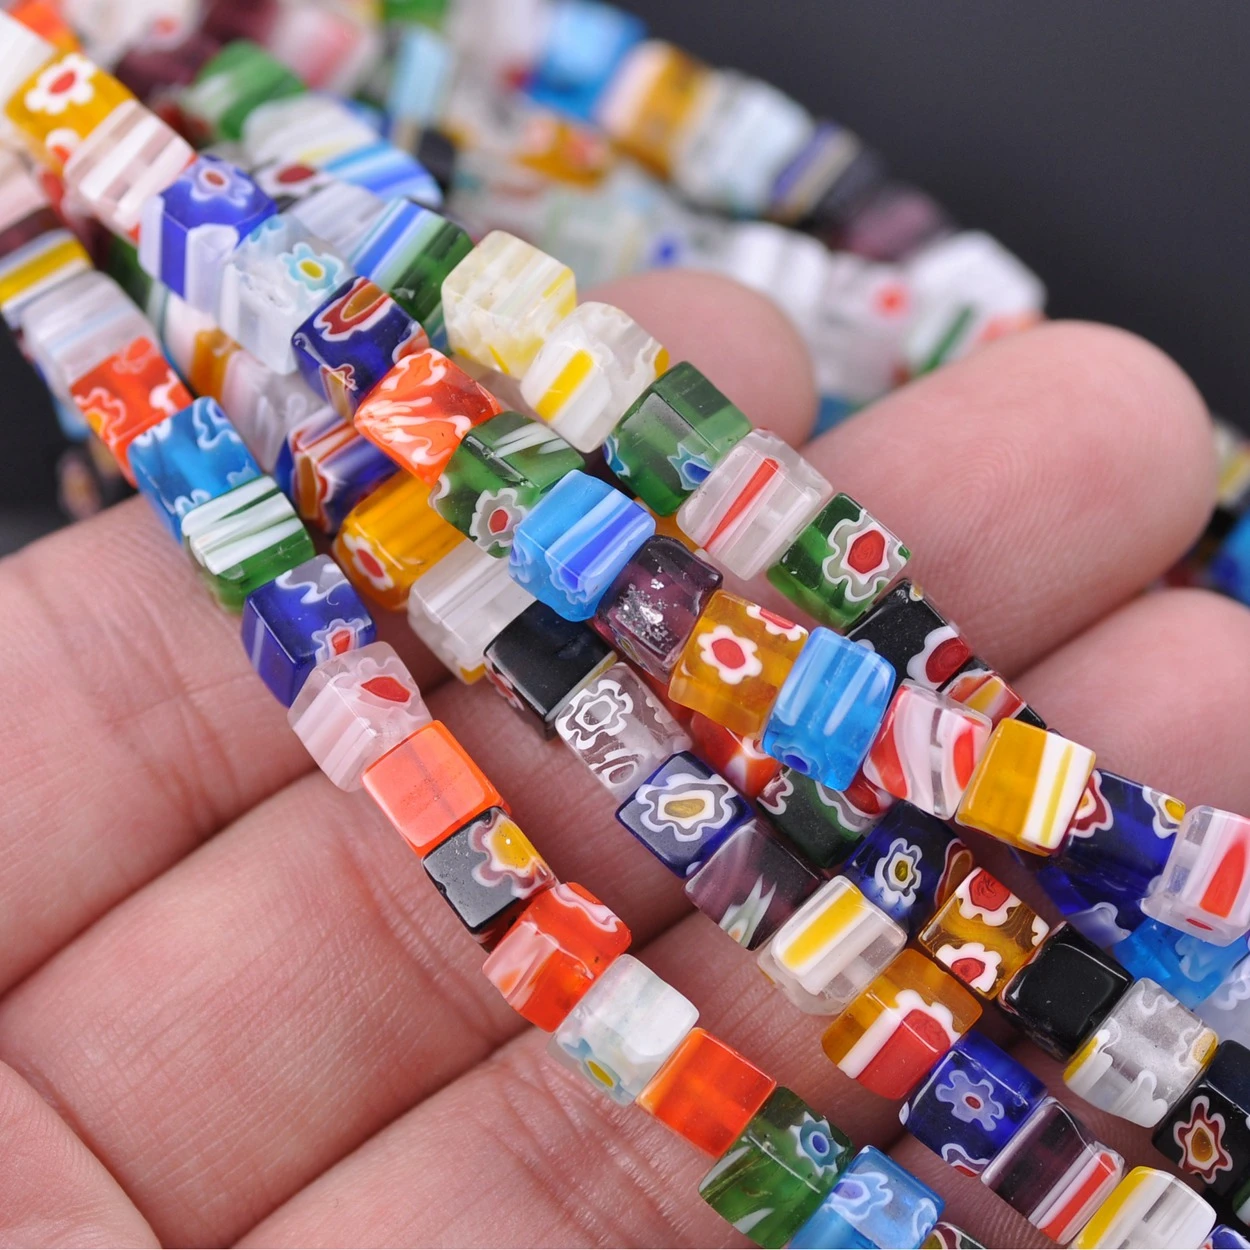 New 50Pcs Flat Shaped Millefiori Glass Loose Spacer Beads Jewelry Making DIY 6mm